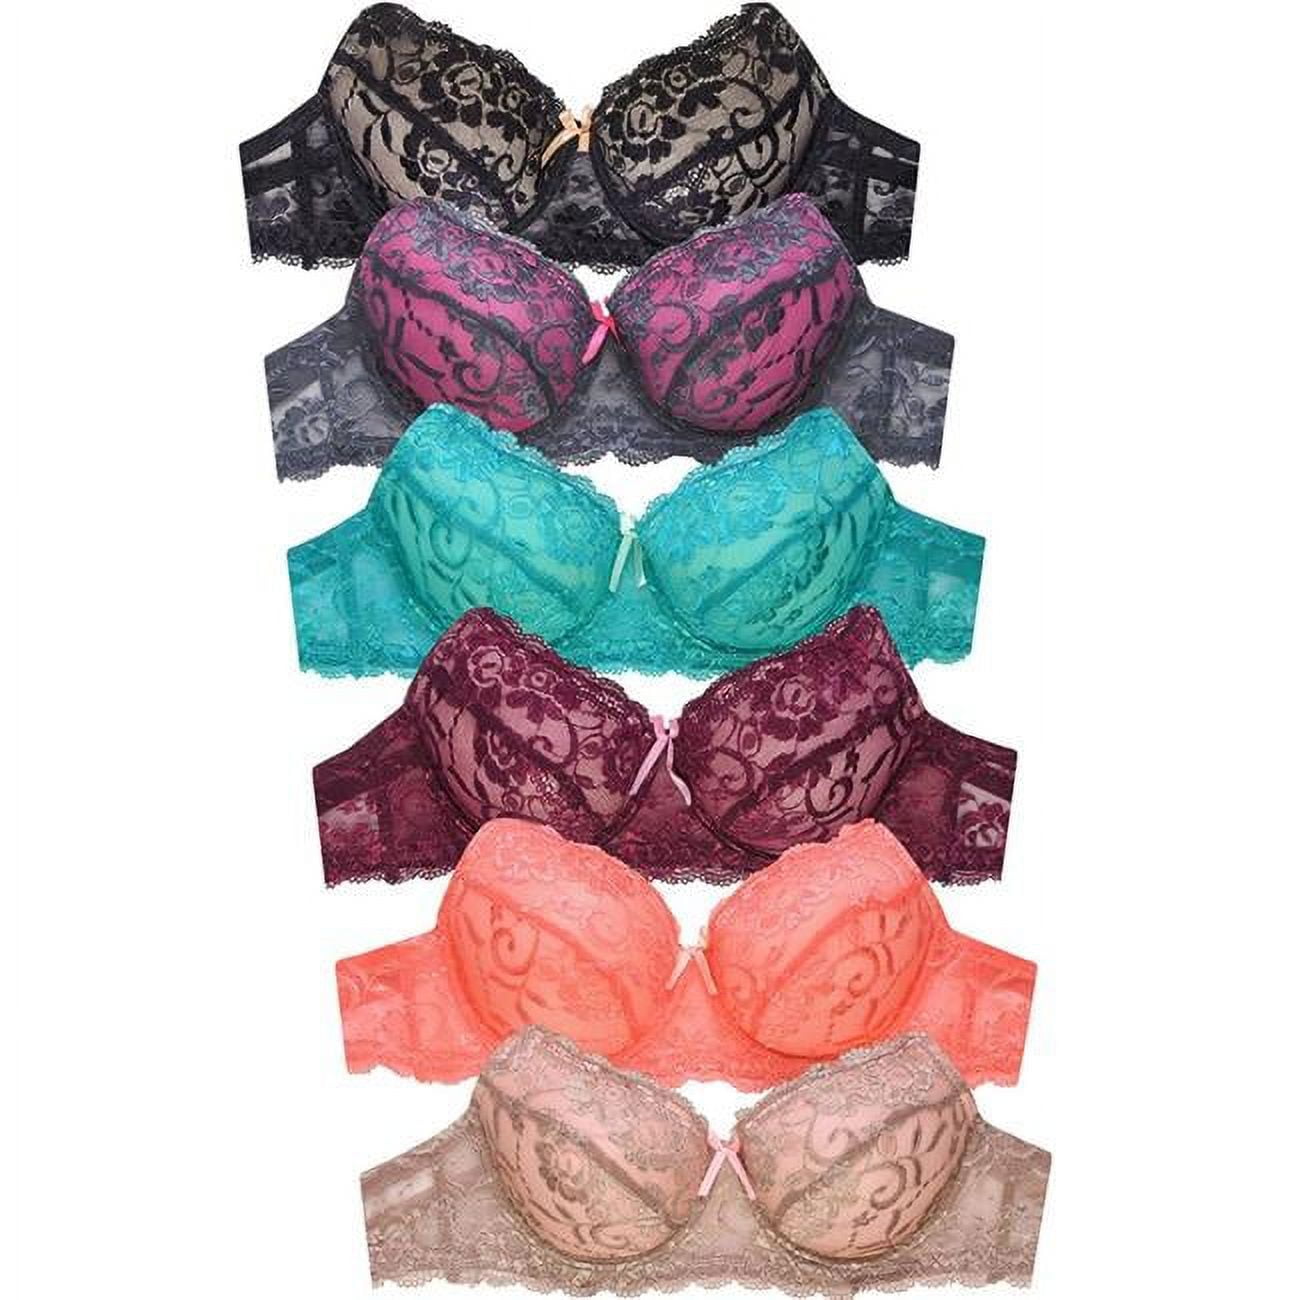 Mamia & Sofra BR4161L3D4-38DDD Womens Intimate Sets - Lace Full DDD Cup Bra  - 38 in. - Pack of 6